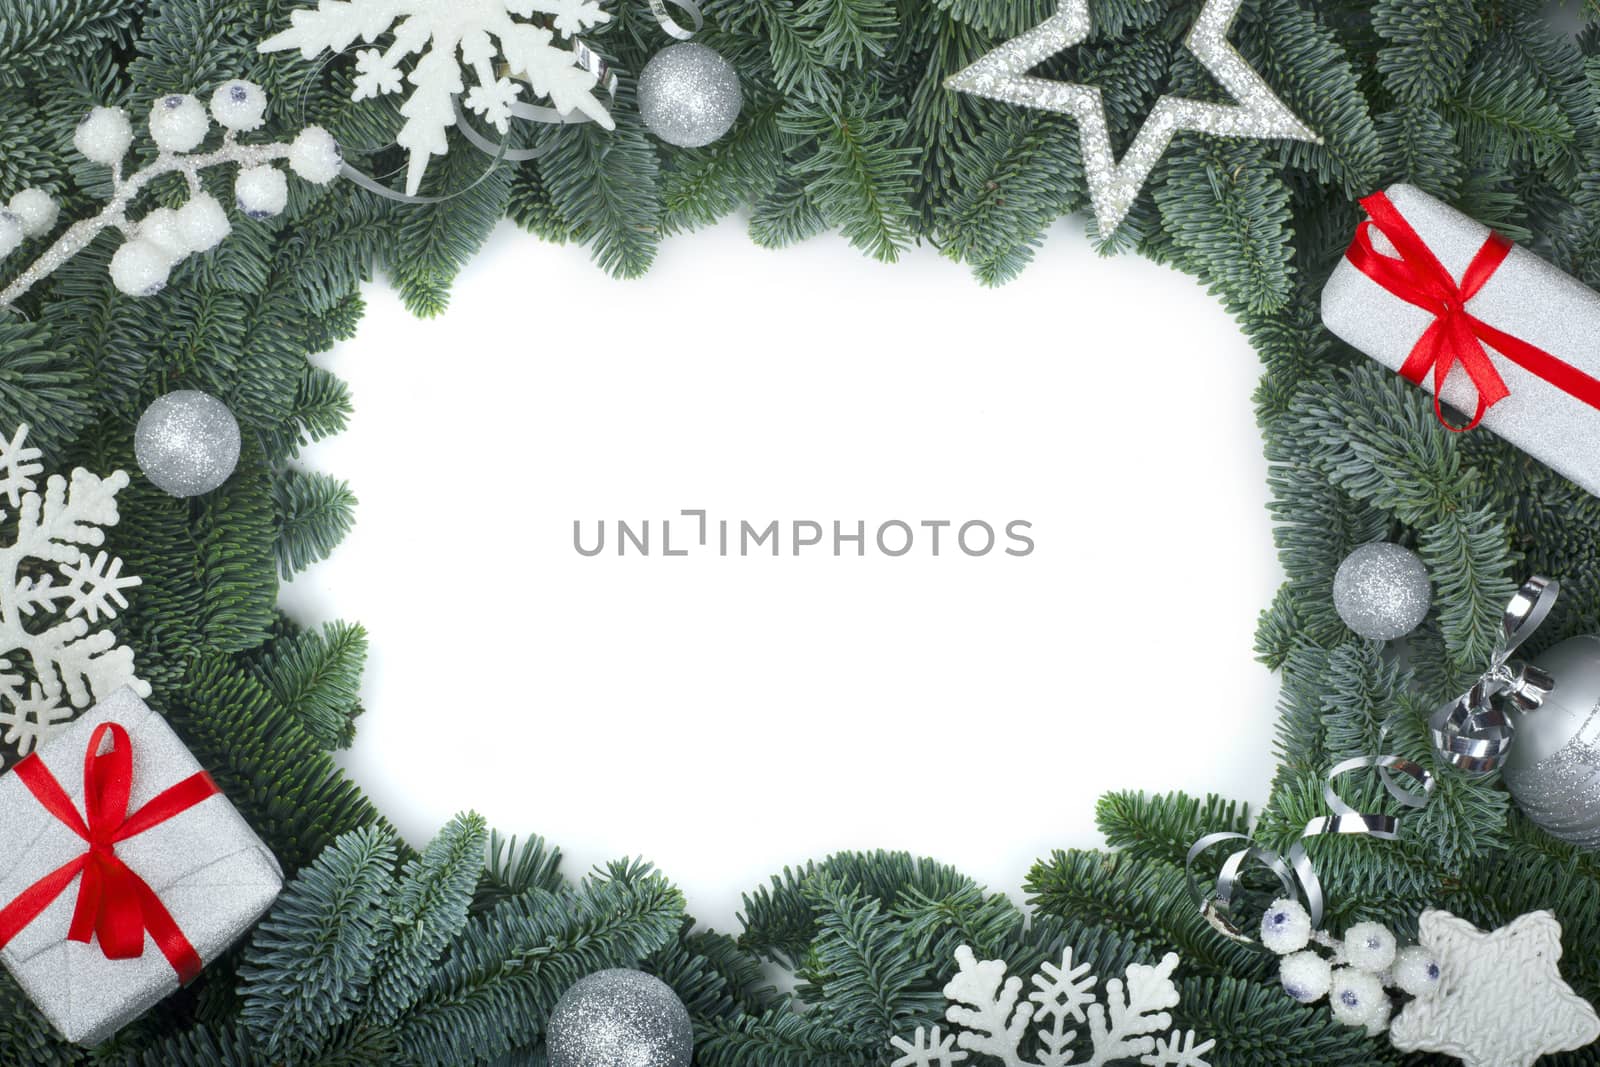 Christmas design boder frame greeting card of noble fir tree branches gifts and silver baubles isolated on white background